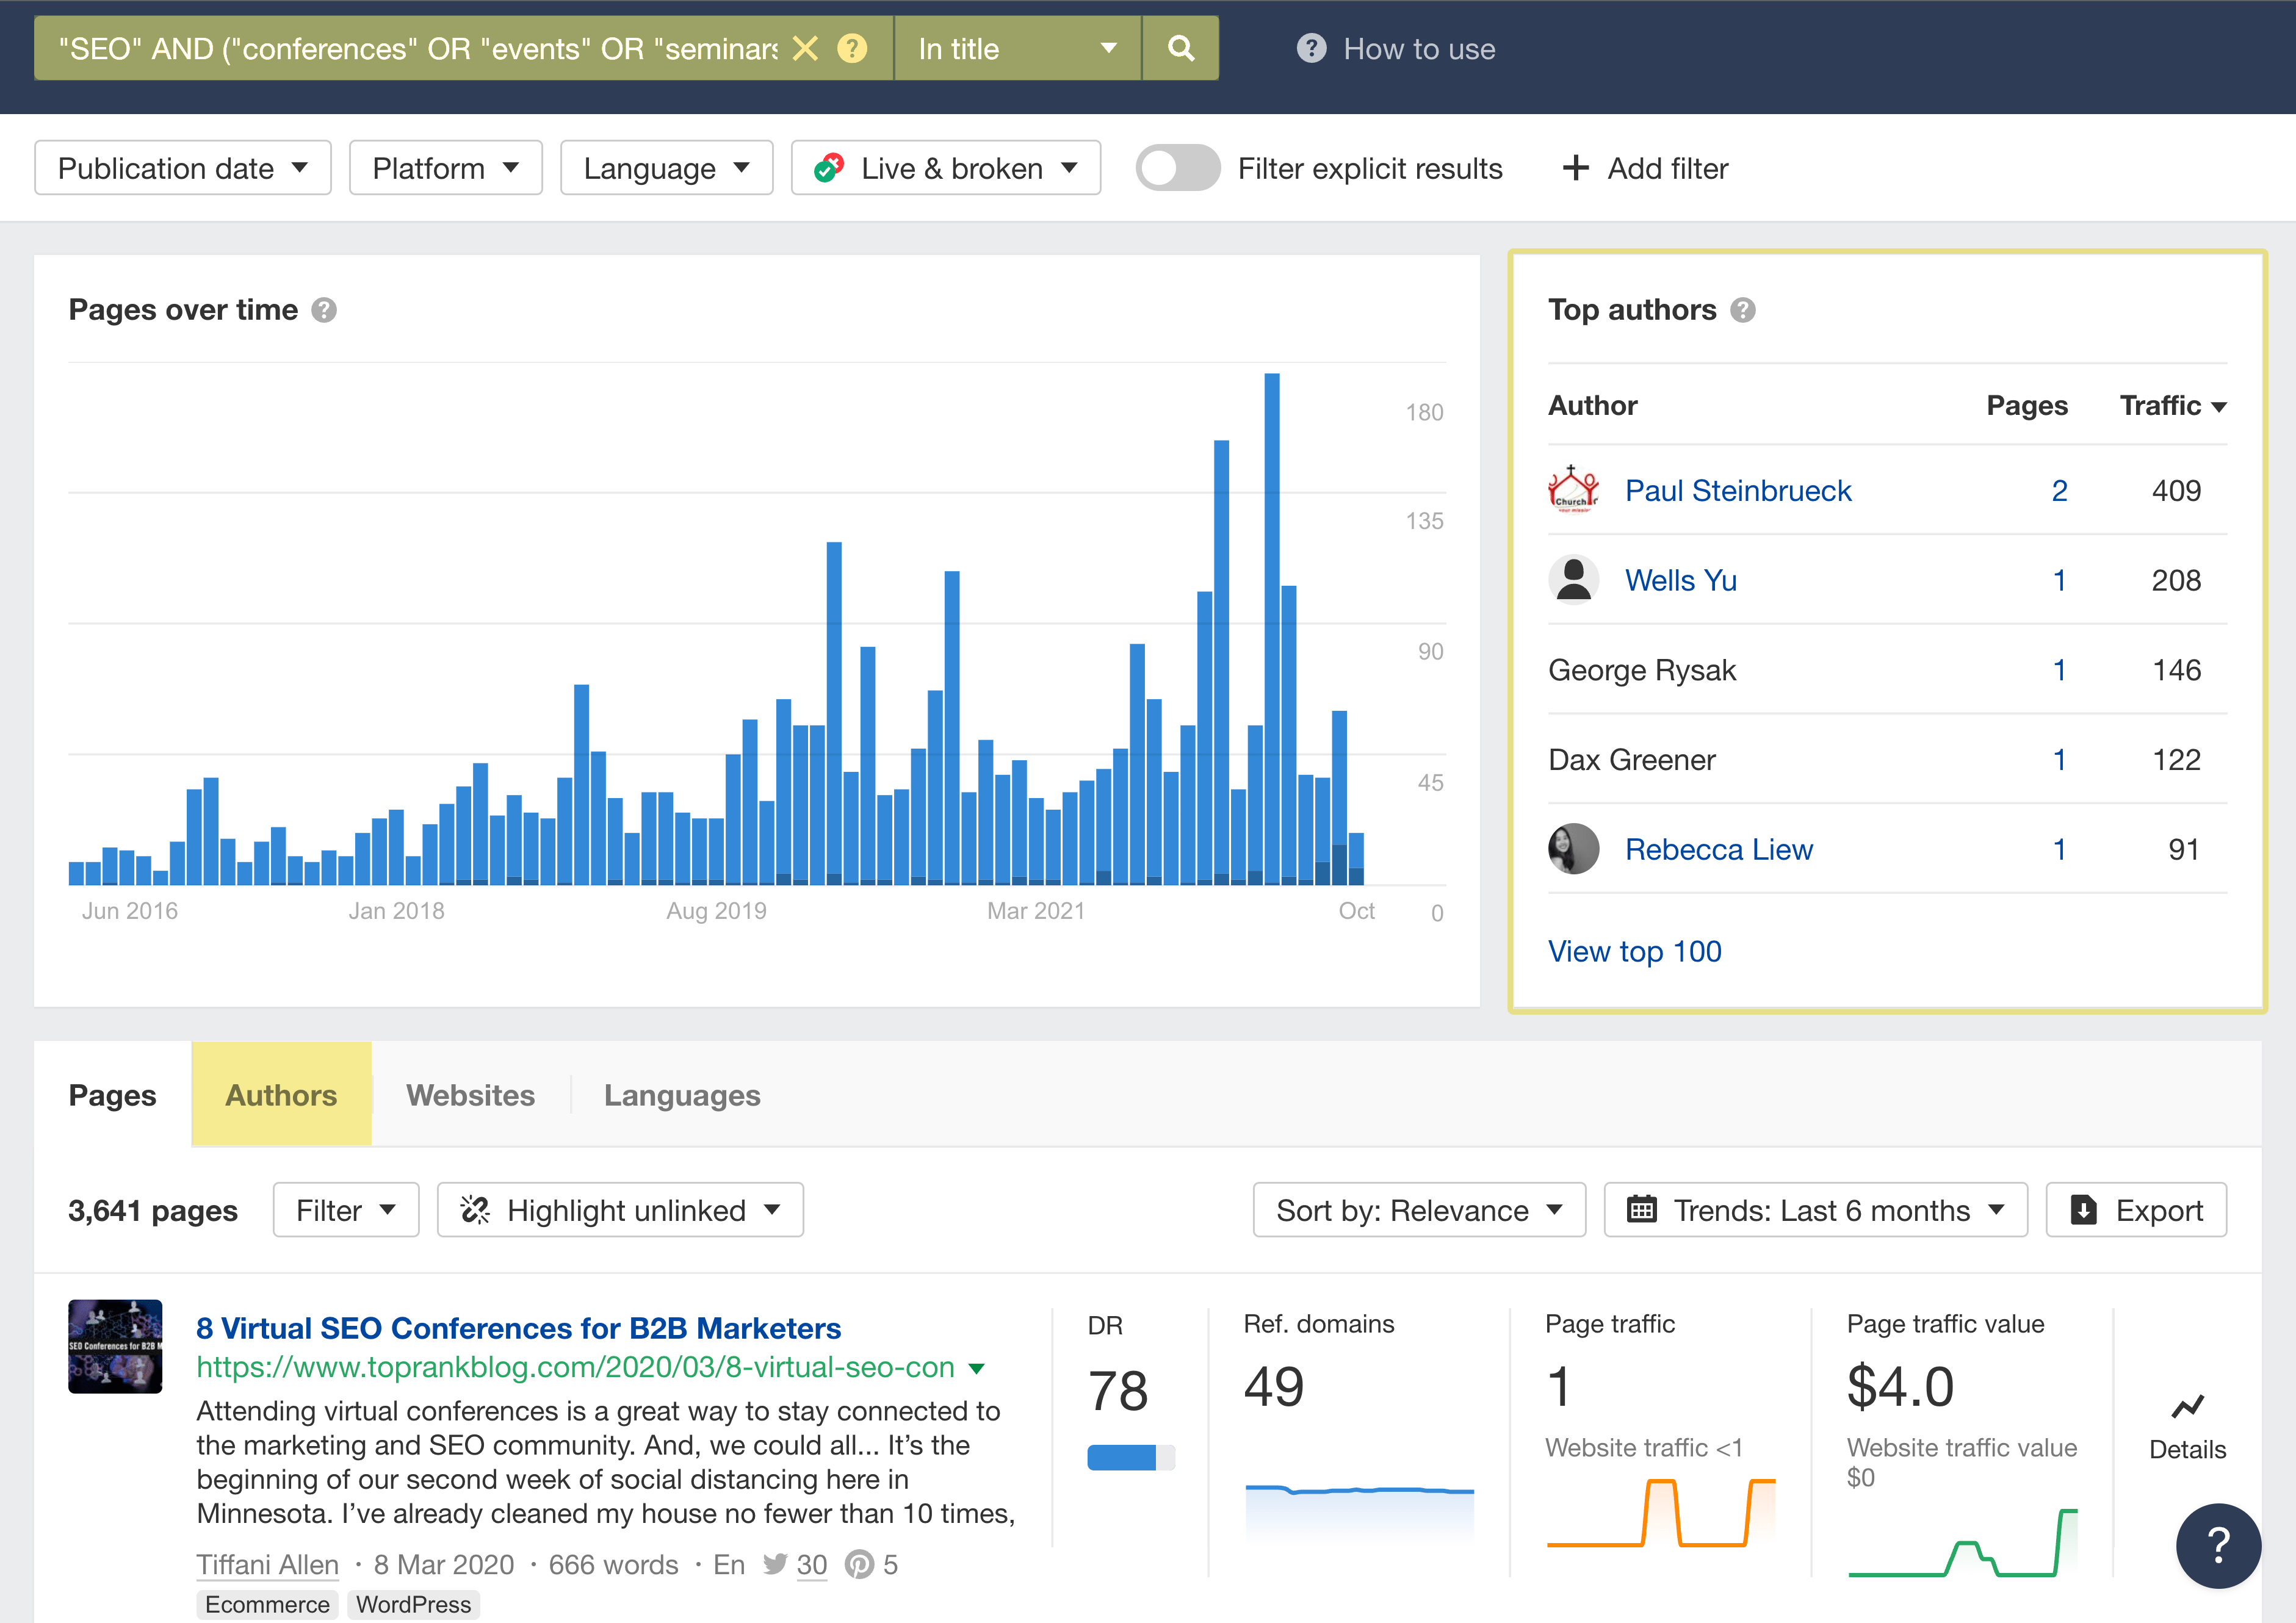 Finding contacts and bloggers using Ahrefs' Content Explorer
